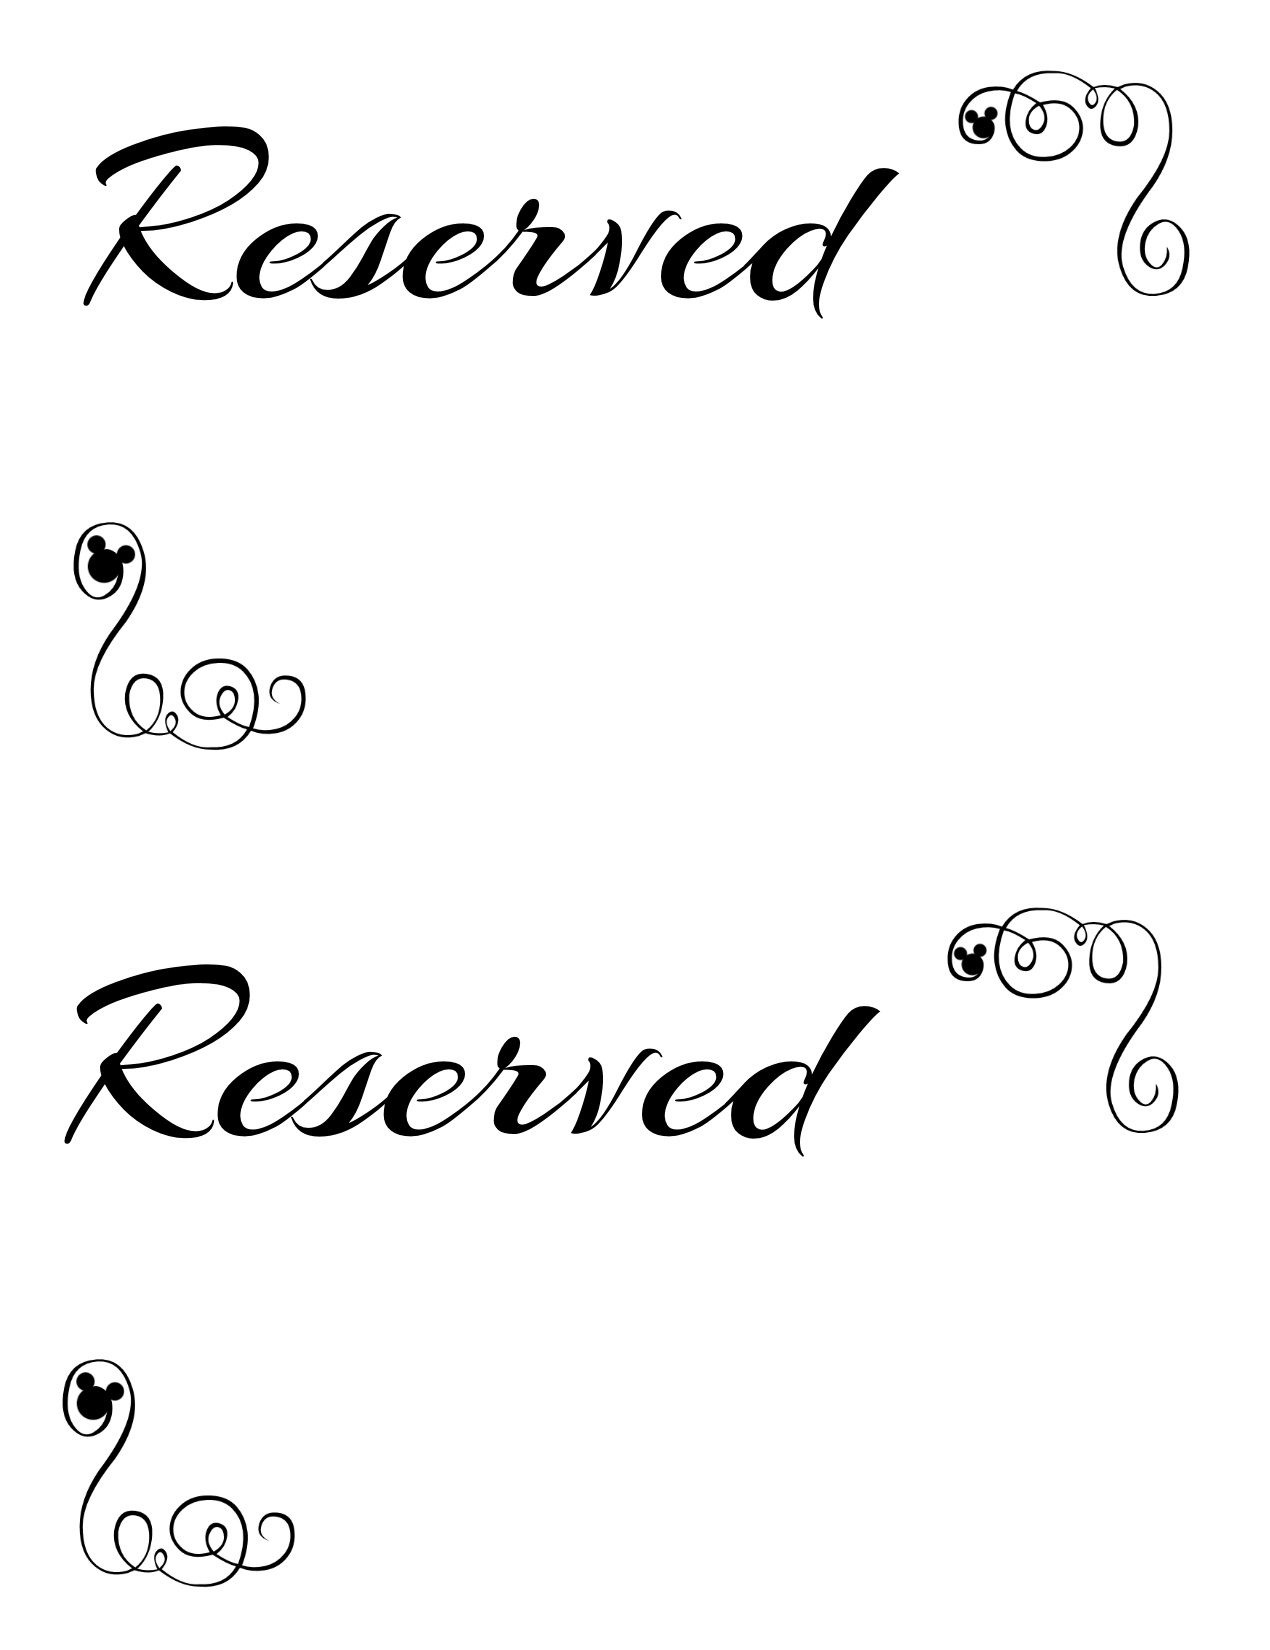 Free Printable Reserved Seating Signs For Your Wedding Ceremony - Free Printable Wedding Signs